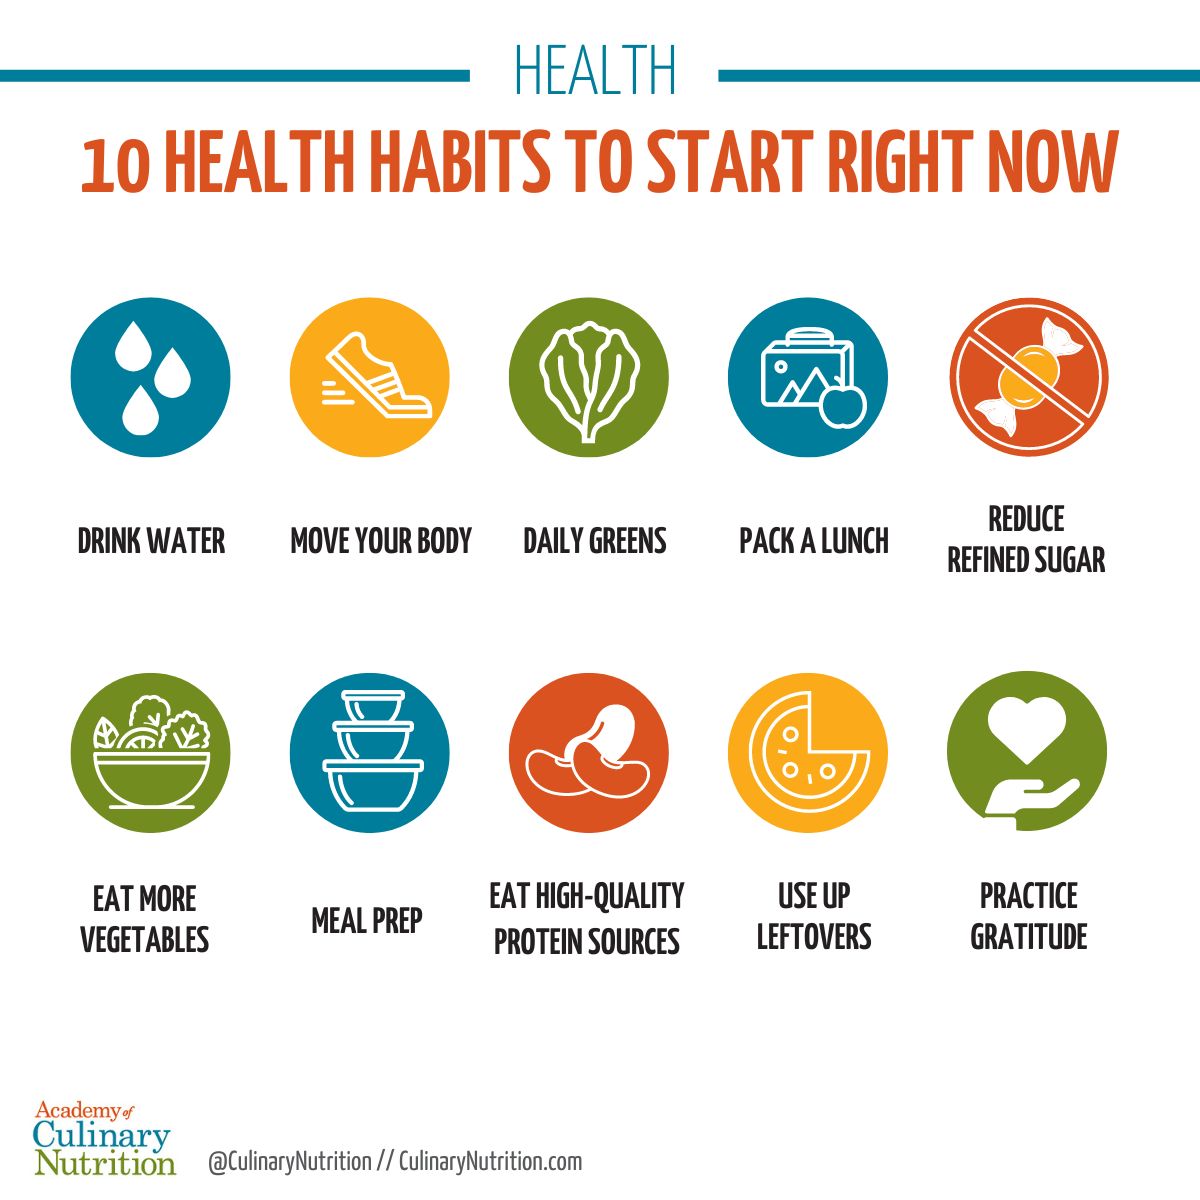 10 Health Habits to Start Right Now